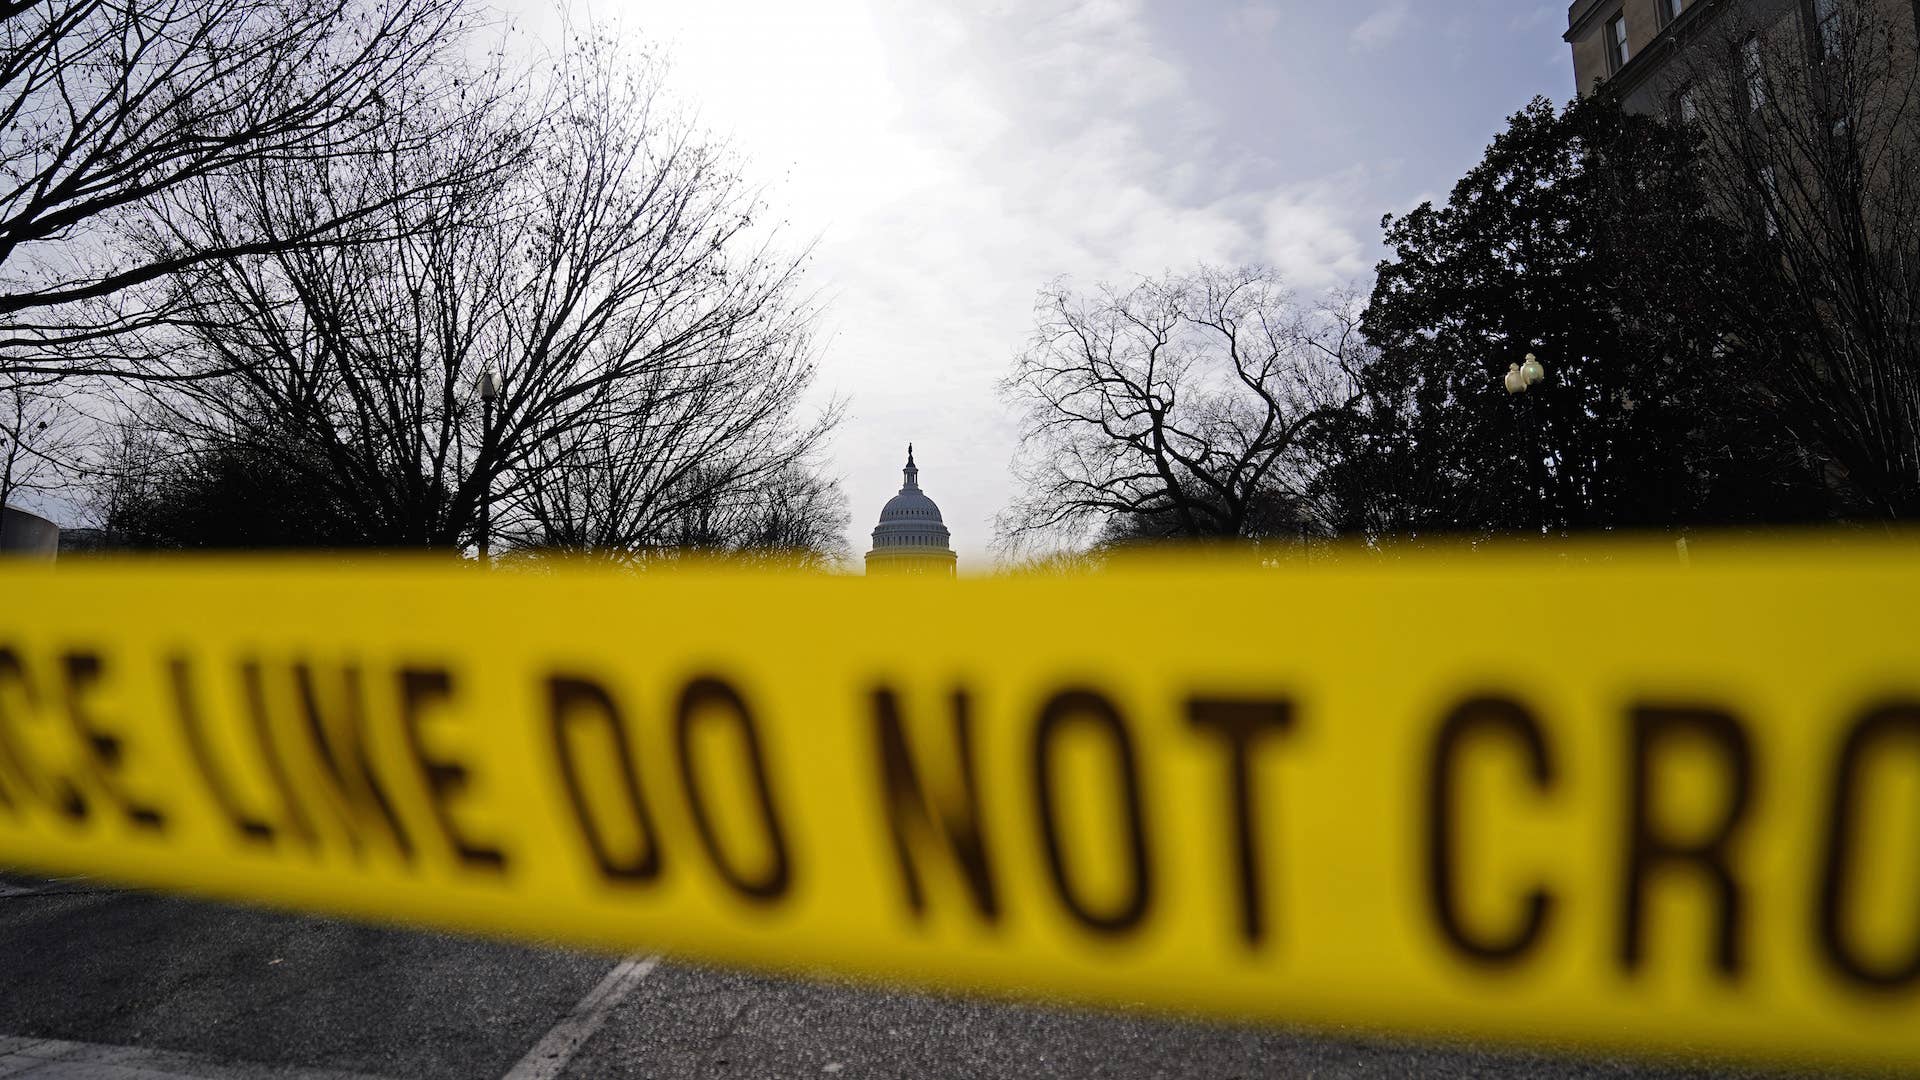 The U.S. Capitol is seen behind yellow police tape